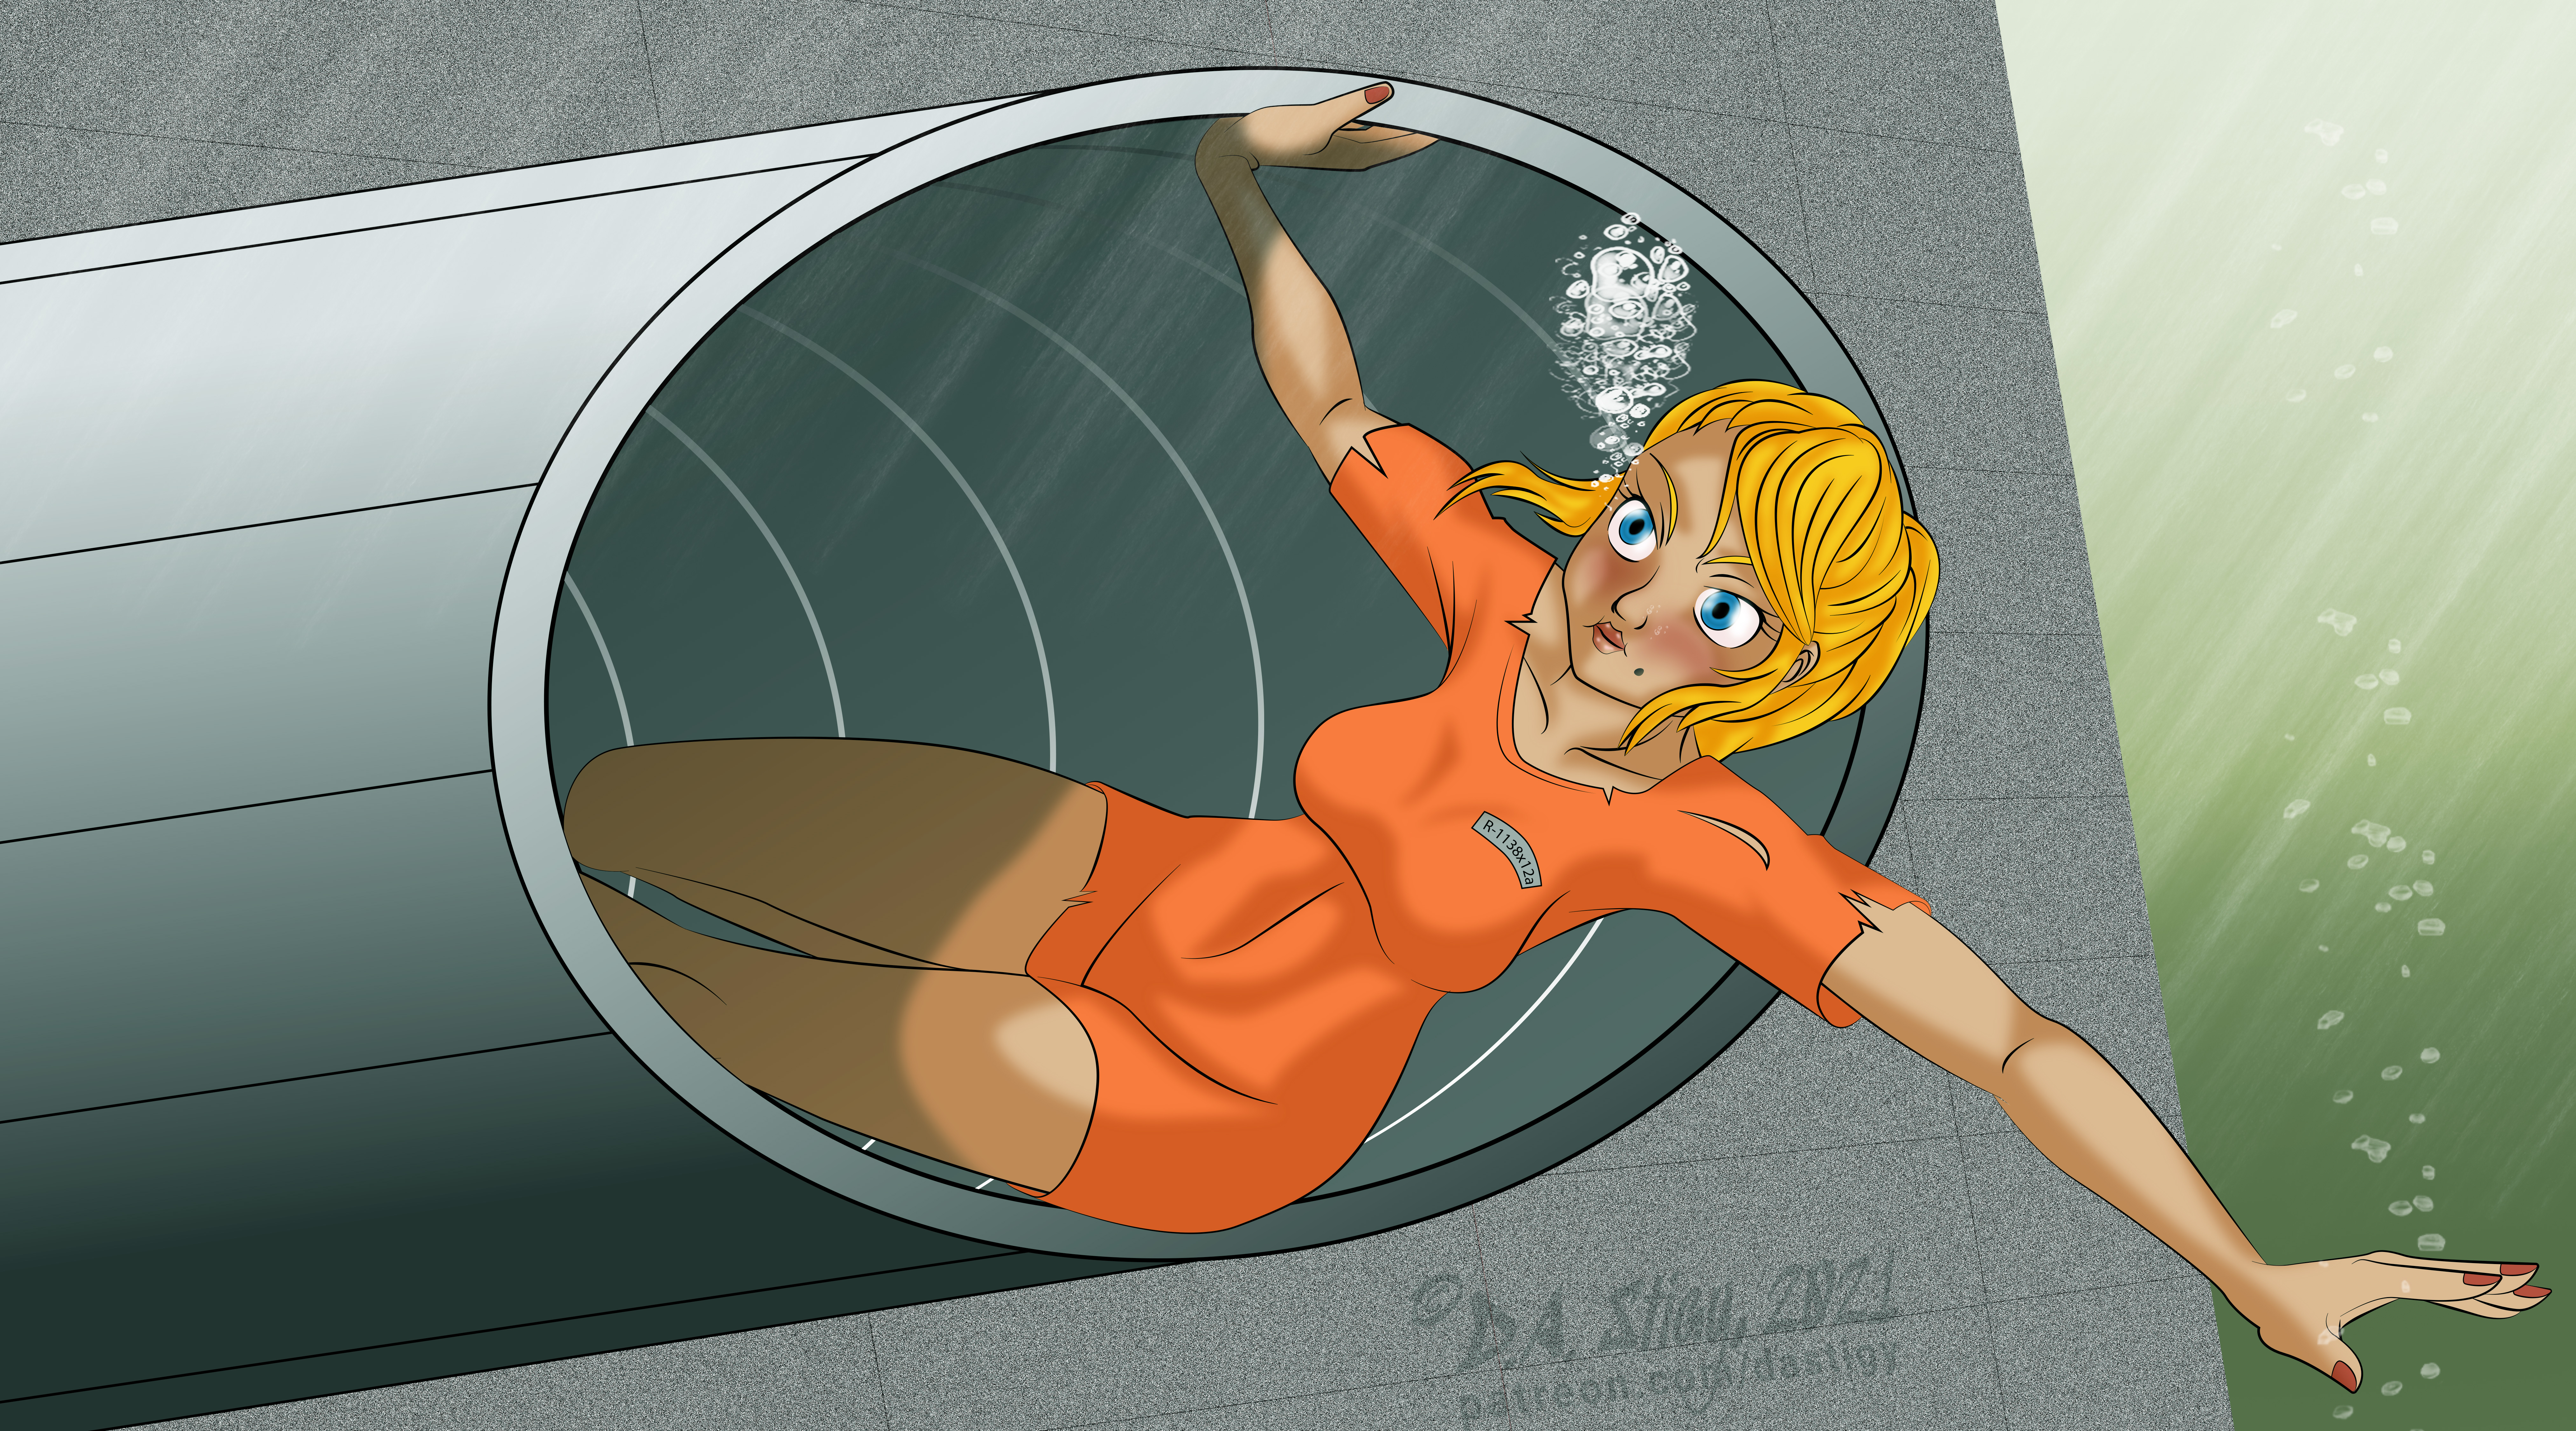 Samus, swims out an underwater pipe in a prisoner tunic